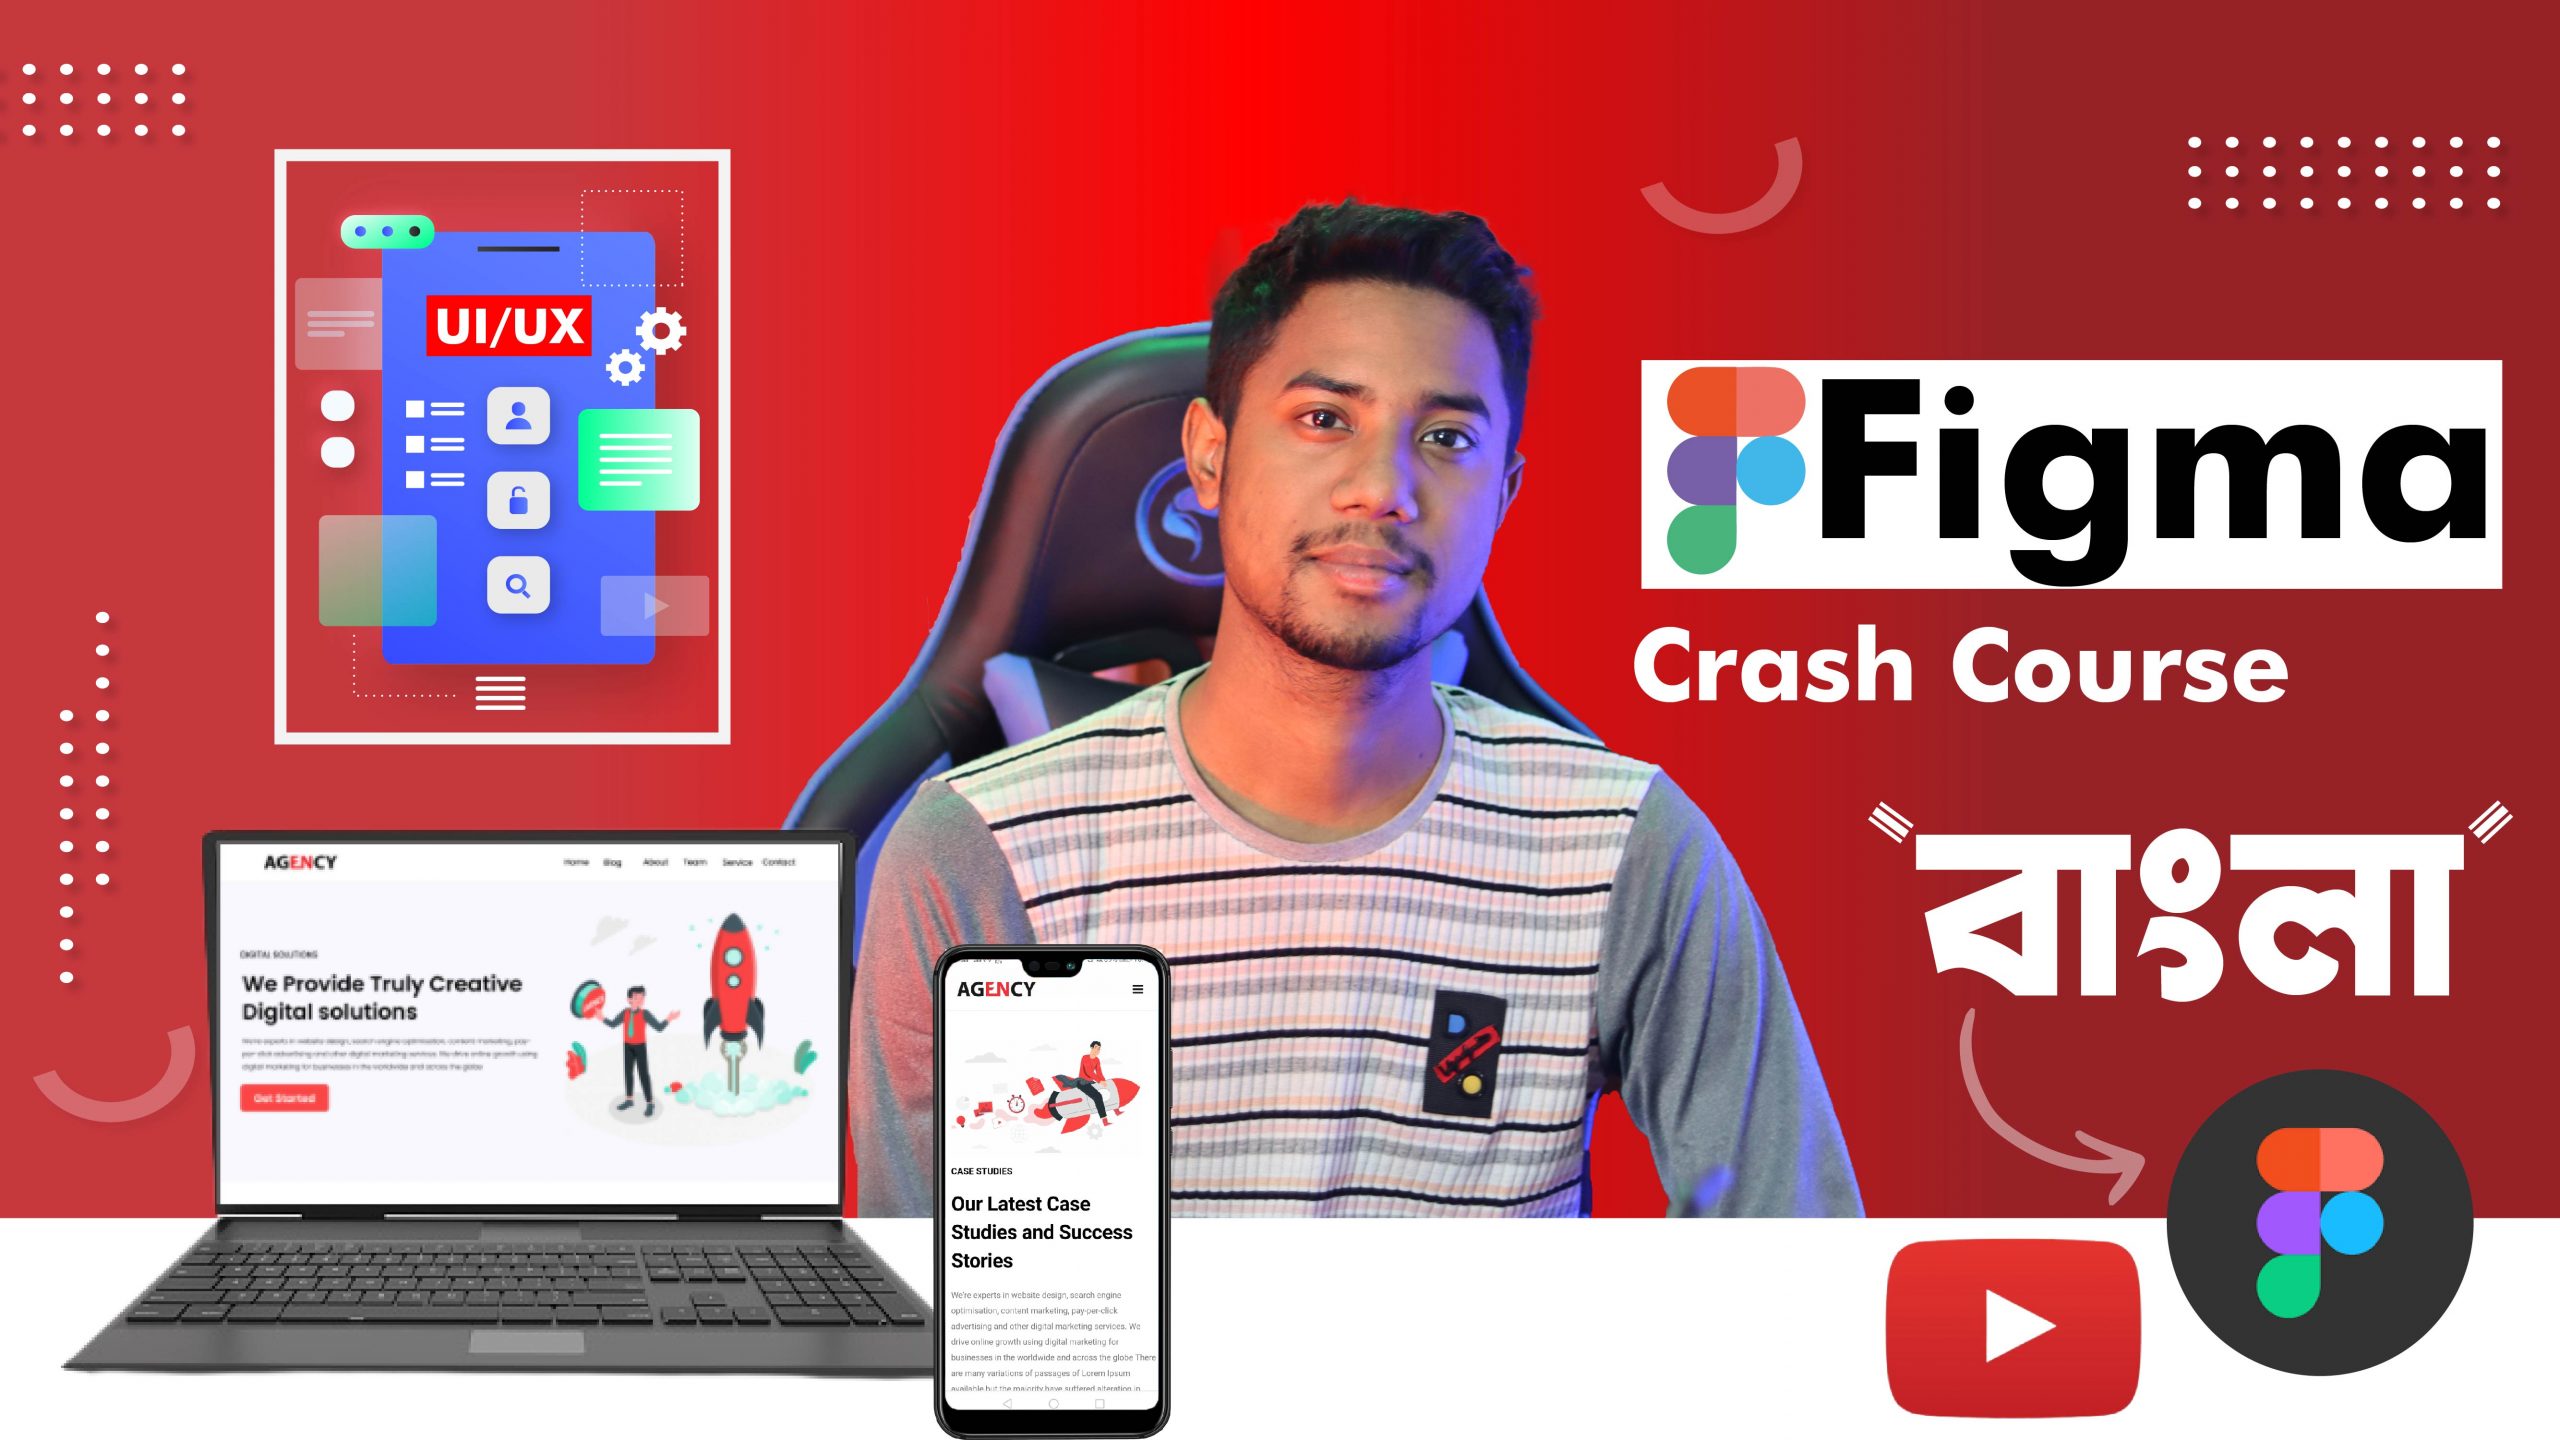 You are currently viewing Figma Crash Course by Md Azizul